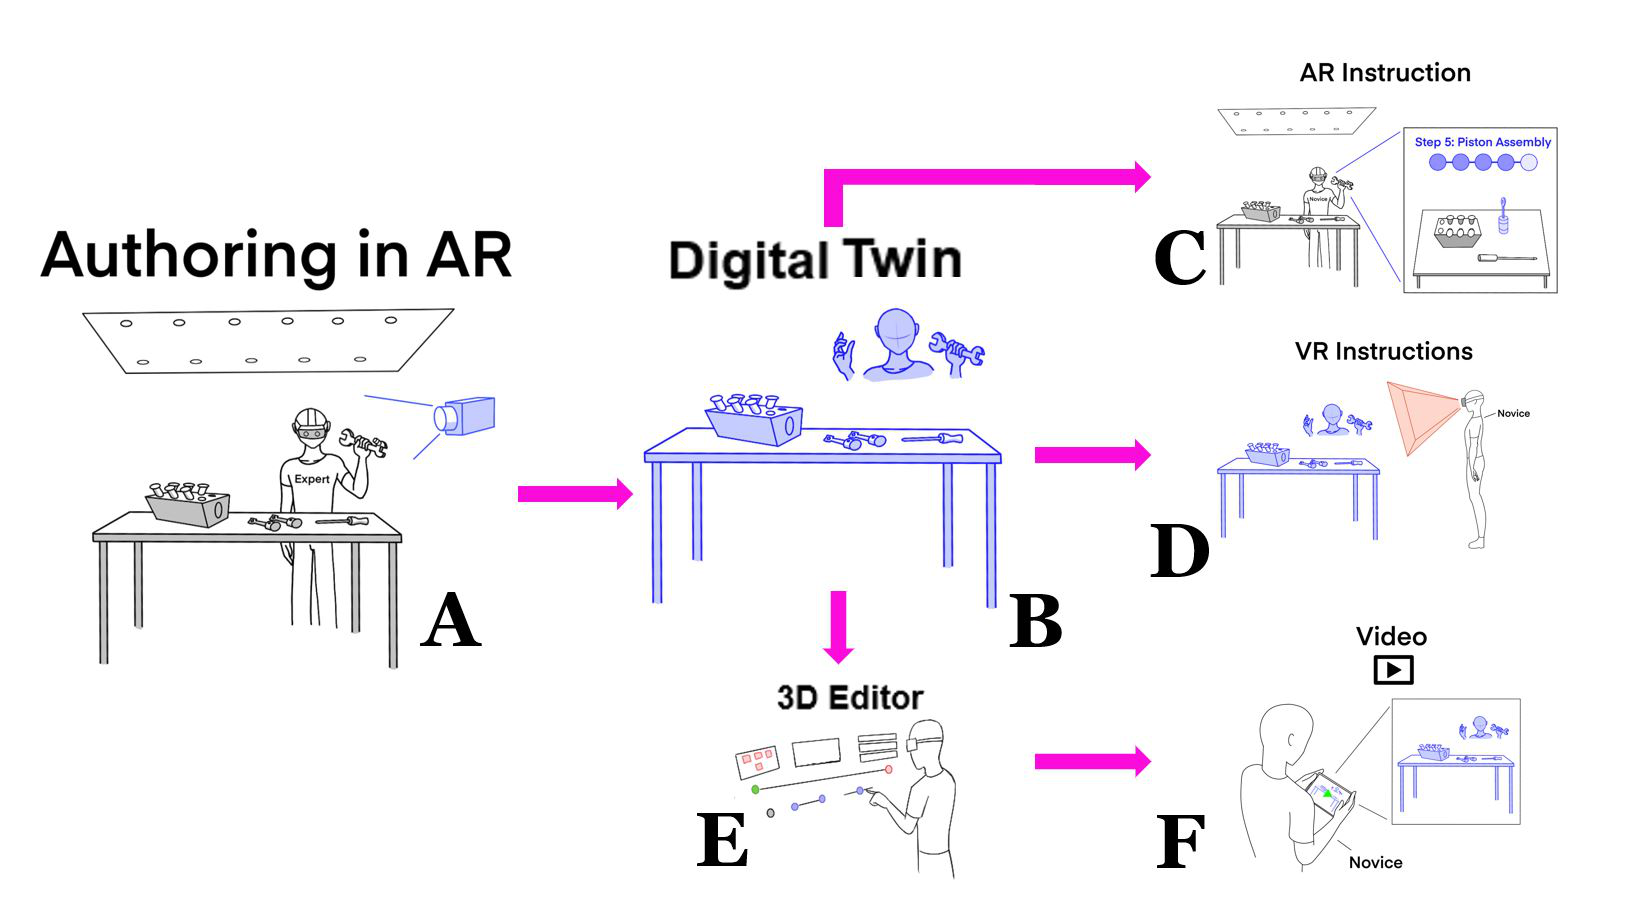 EditAR: A Digital Twin Authoring and Editing Environment for Creation of AR/VR and Video Instructions from a Single Demonstration